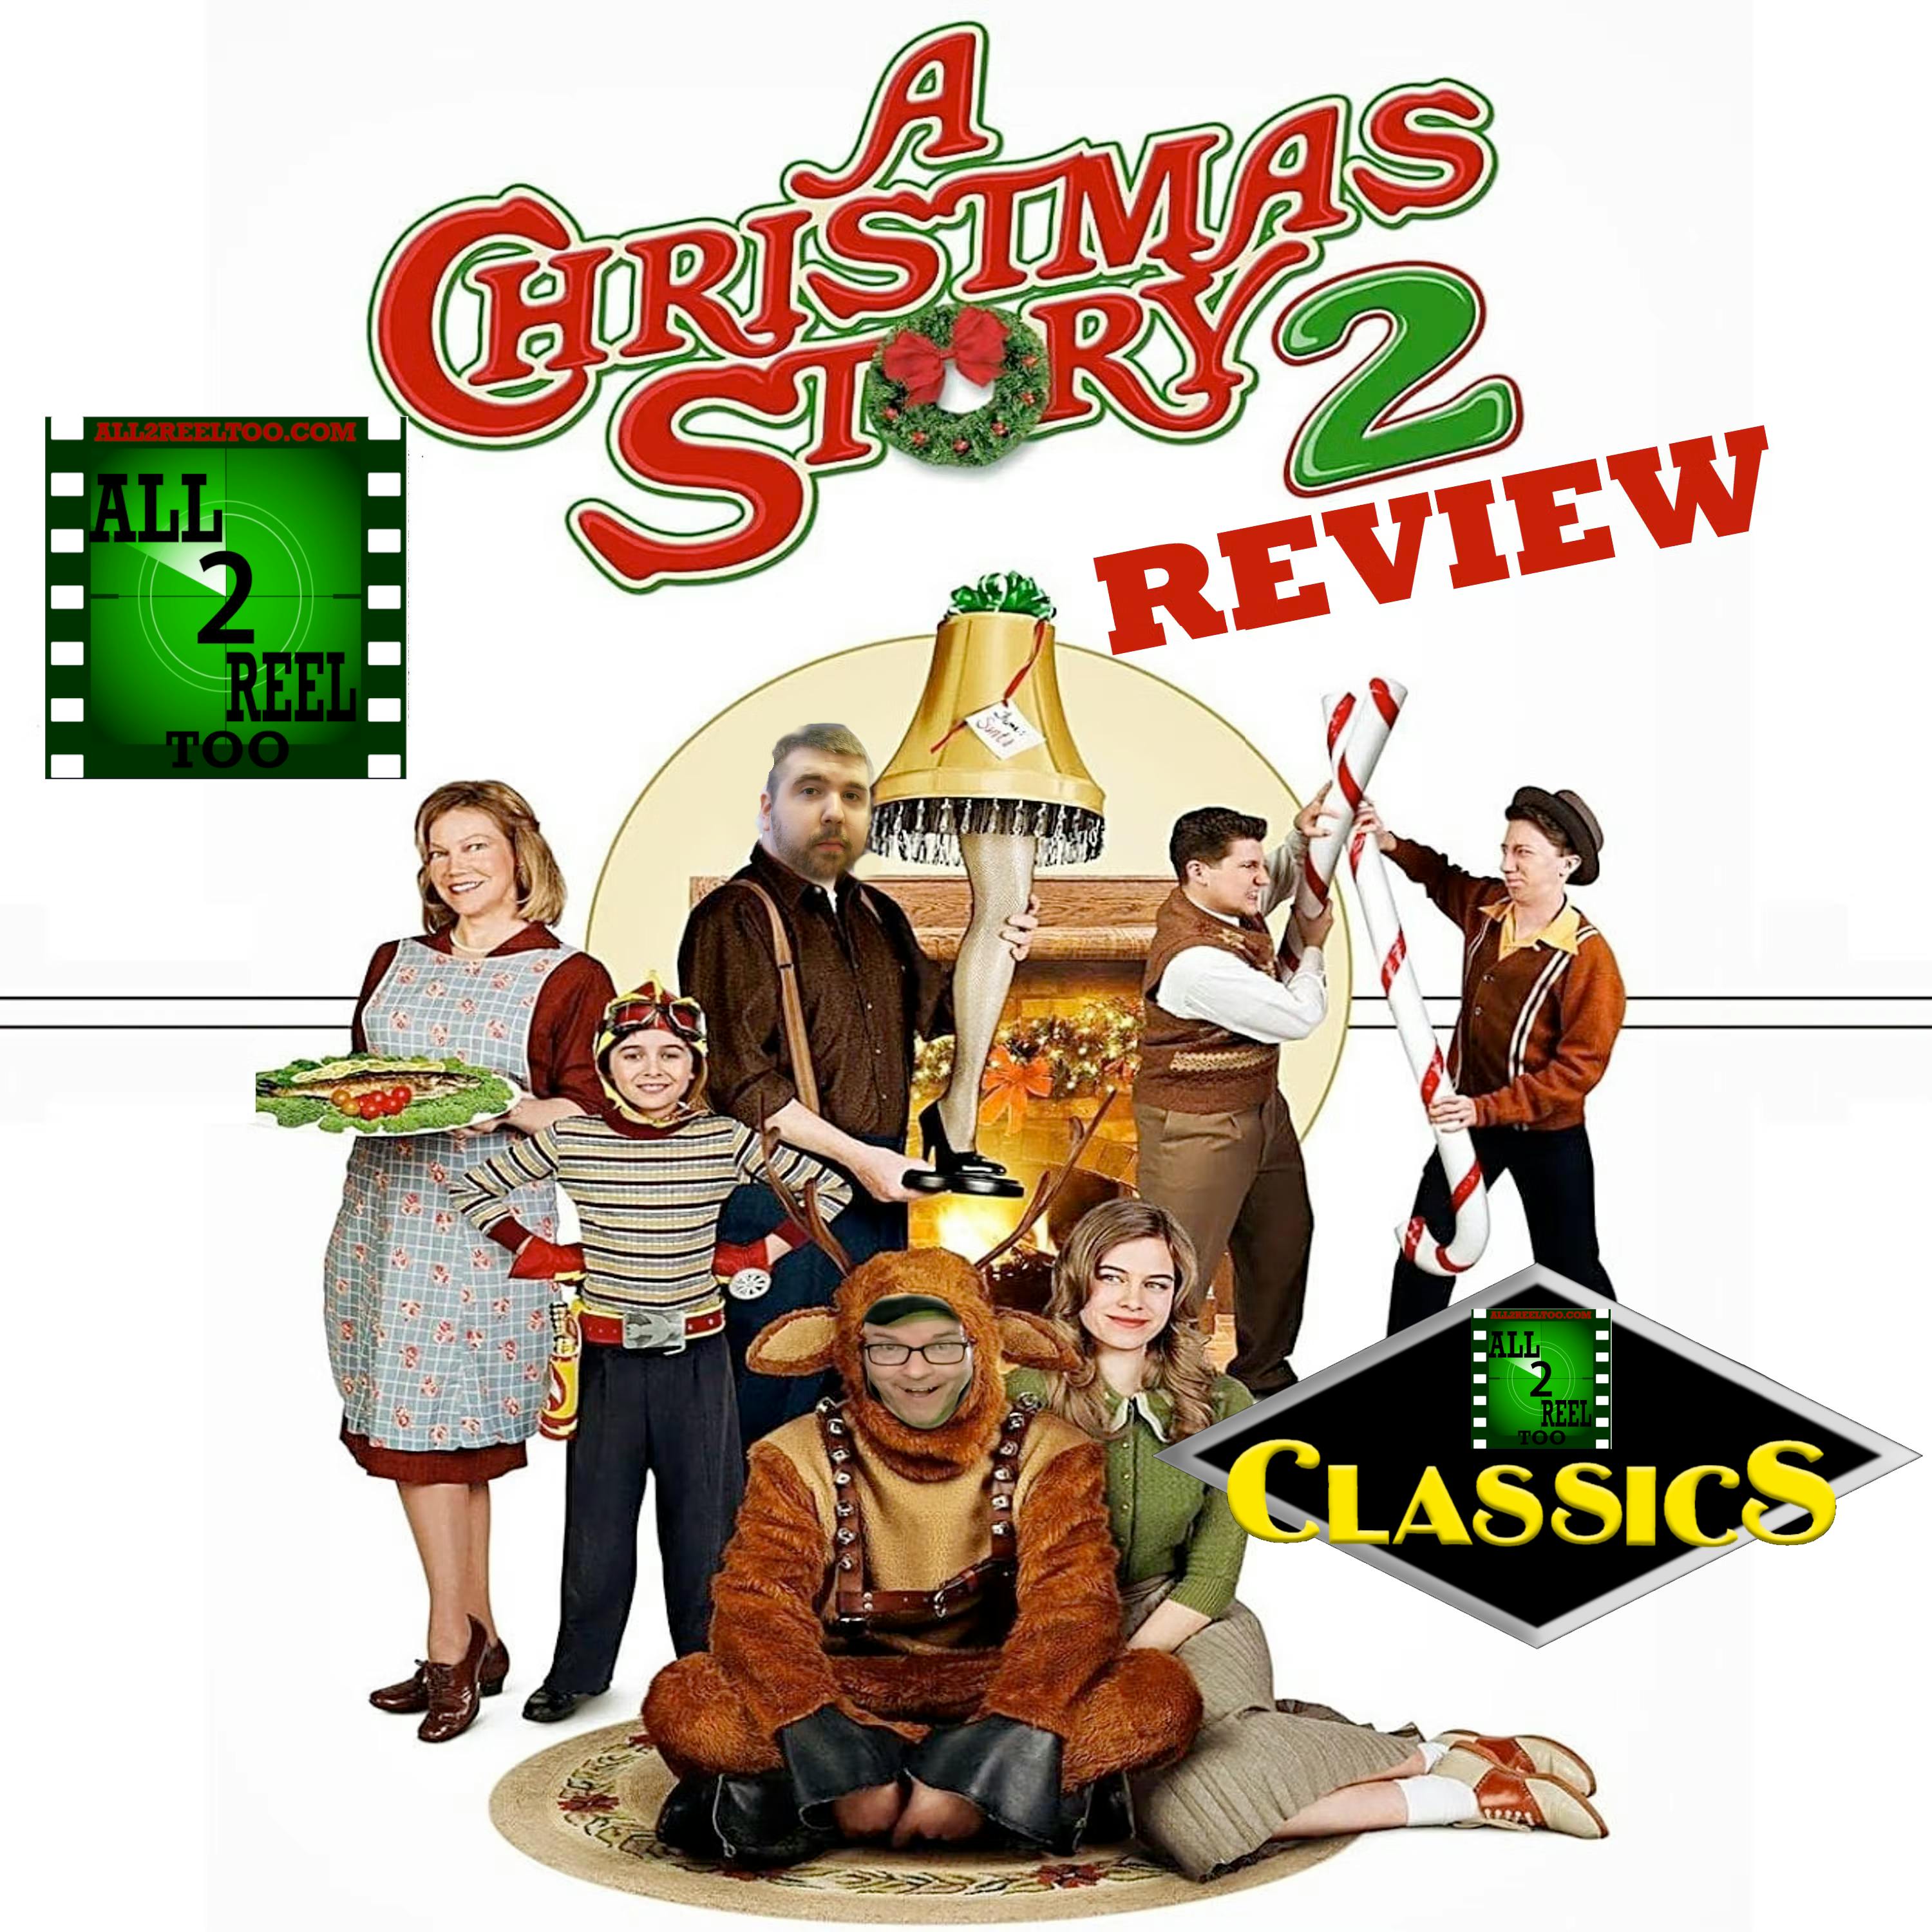 ALL2REELTOO CLASSICS - A Christmas Story 2 (2012)- Direct From Hell